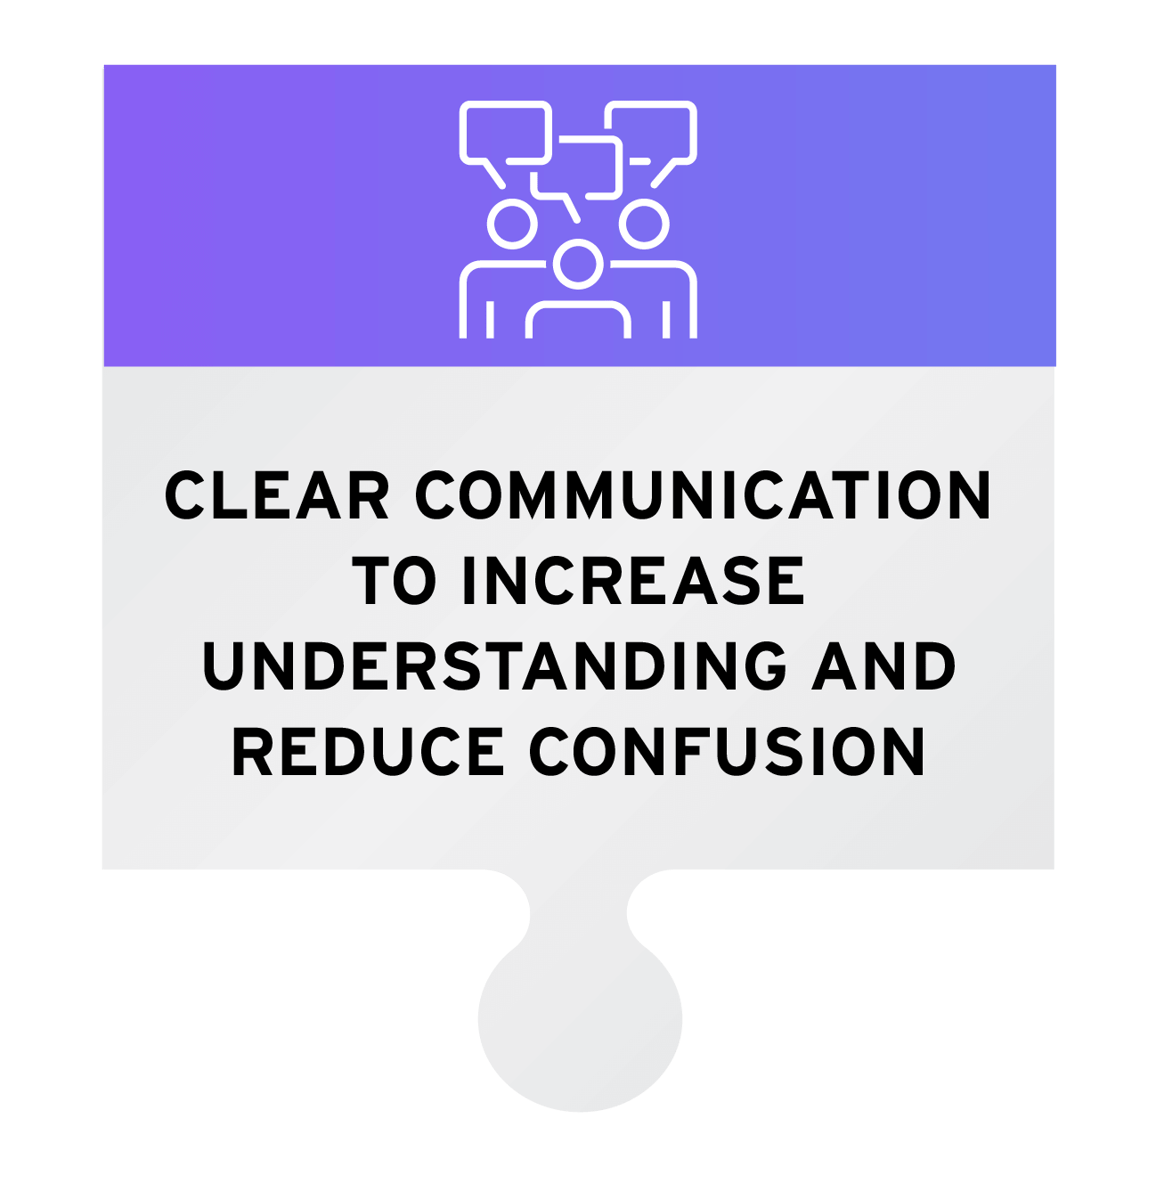 Clear communication to increase understanding and reduce confusion